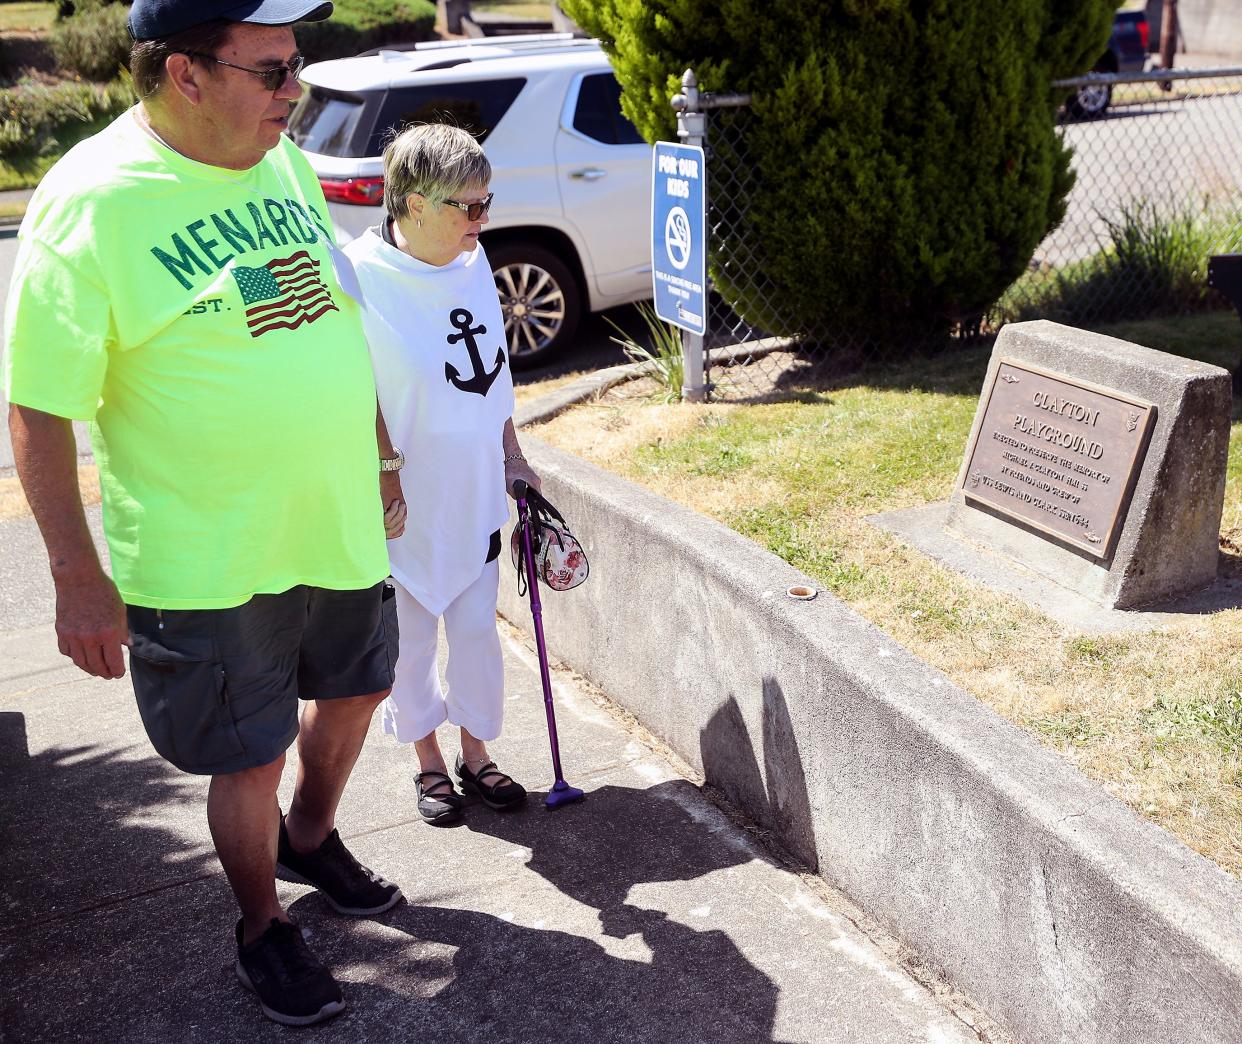 Thom Theele and Merrily LeVee pause to look at the memorial plaque dedicating Port Orchard's Clayton Playground to USS Lewis and Clark submariner Michael Clayton, as the Florida couple arrives to take part in a reunion of the crew on Thursday.